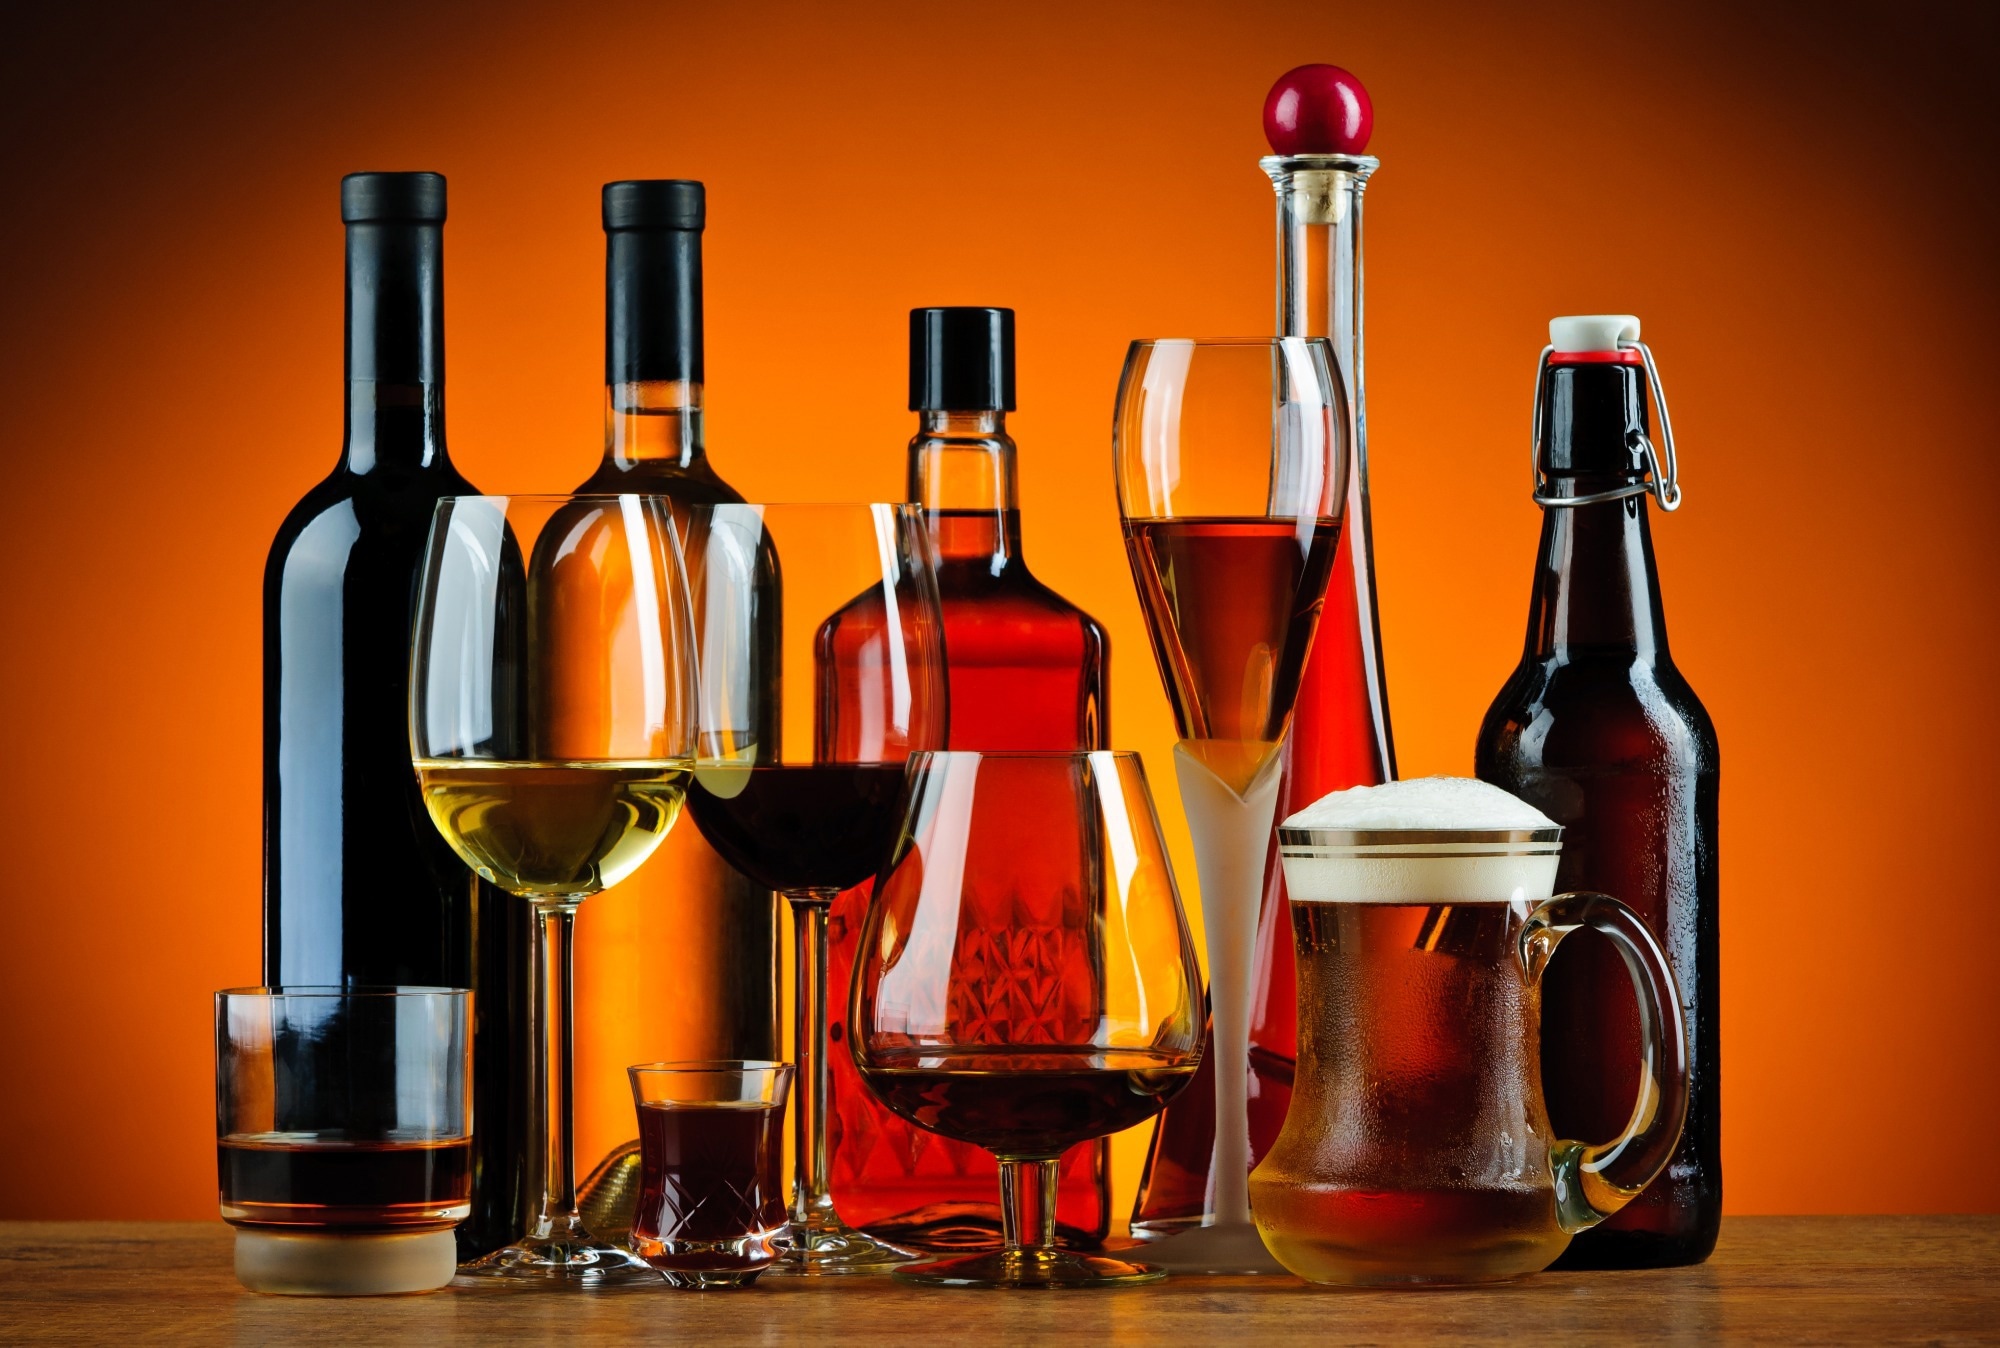 Study: Alcohol consumption and cancer incidence in women: interaction with smoking, body mass index and menopausal hormone therapy. Image Credit: ChristianDraghici/Shutterstock.com